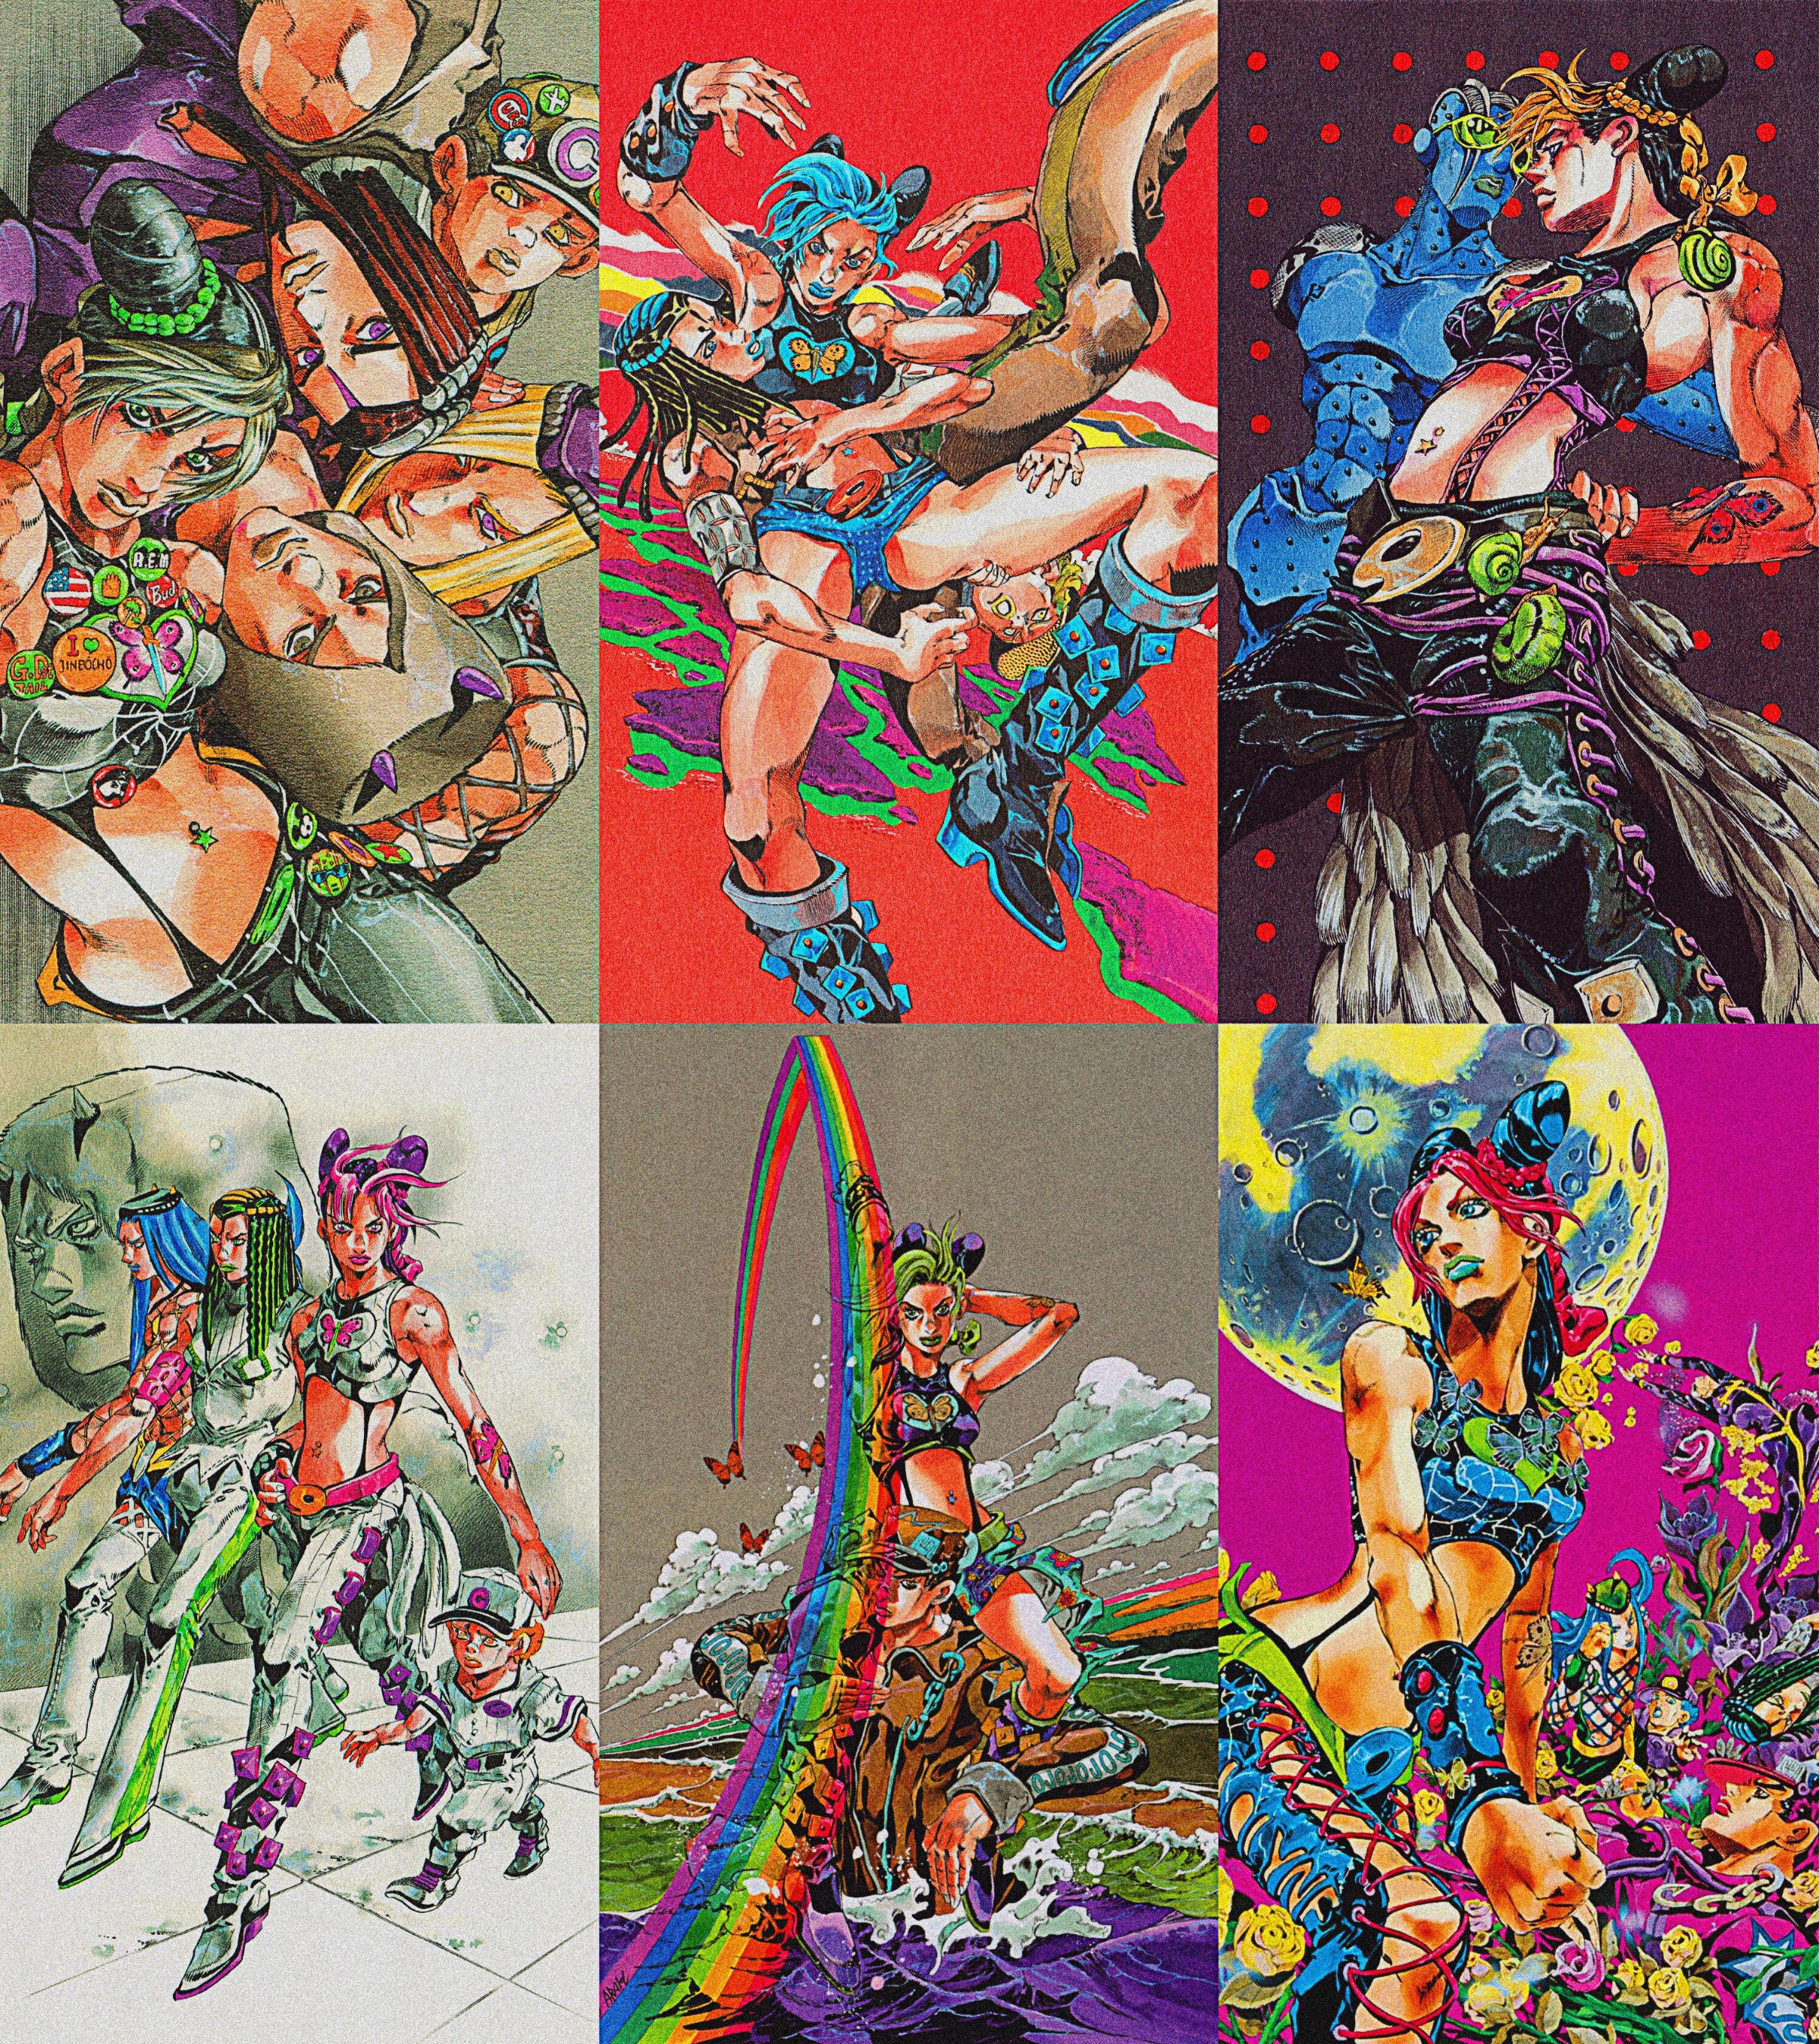 Is Stone Ocean Confirmed? on X: 24 days until the final batch Stone Ocean  is confirmed. jolyne's outfits  / X